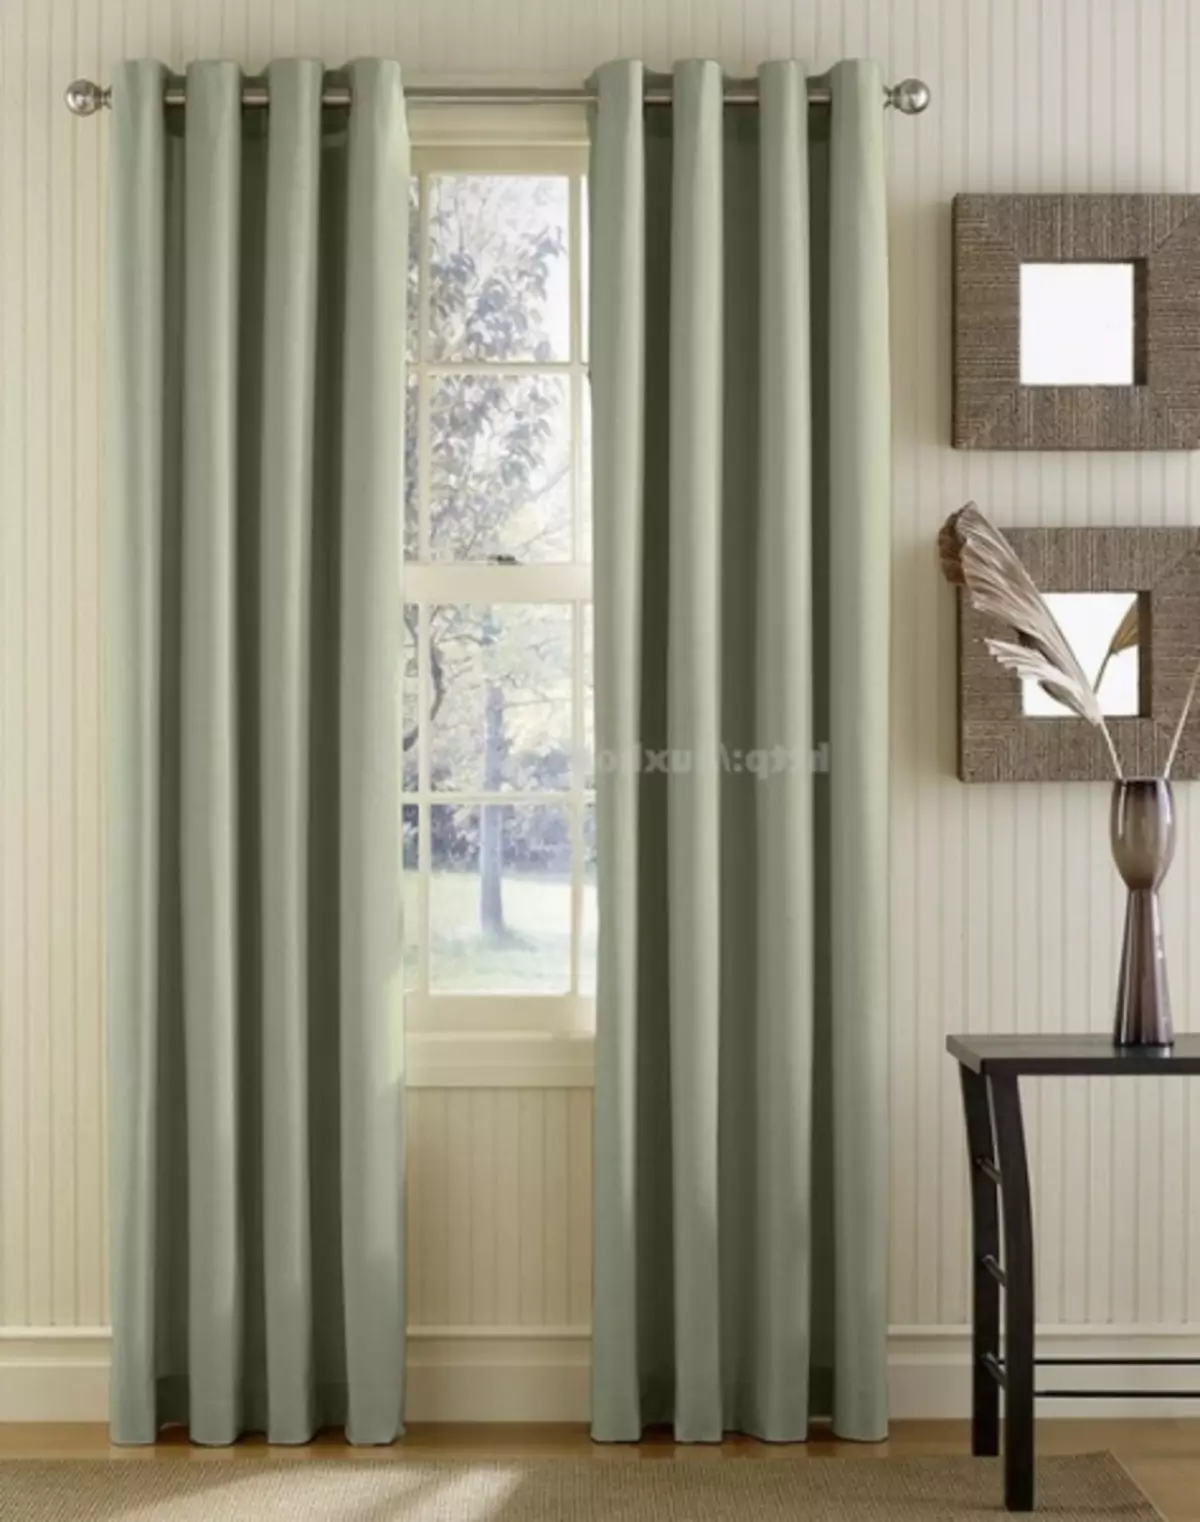 Zoning of one-room apartment with curtains